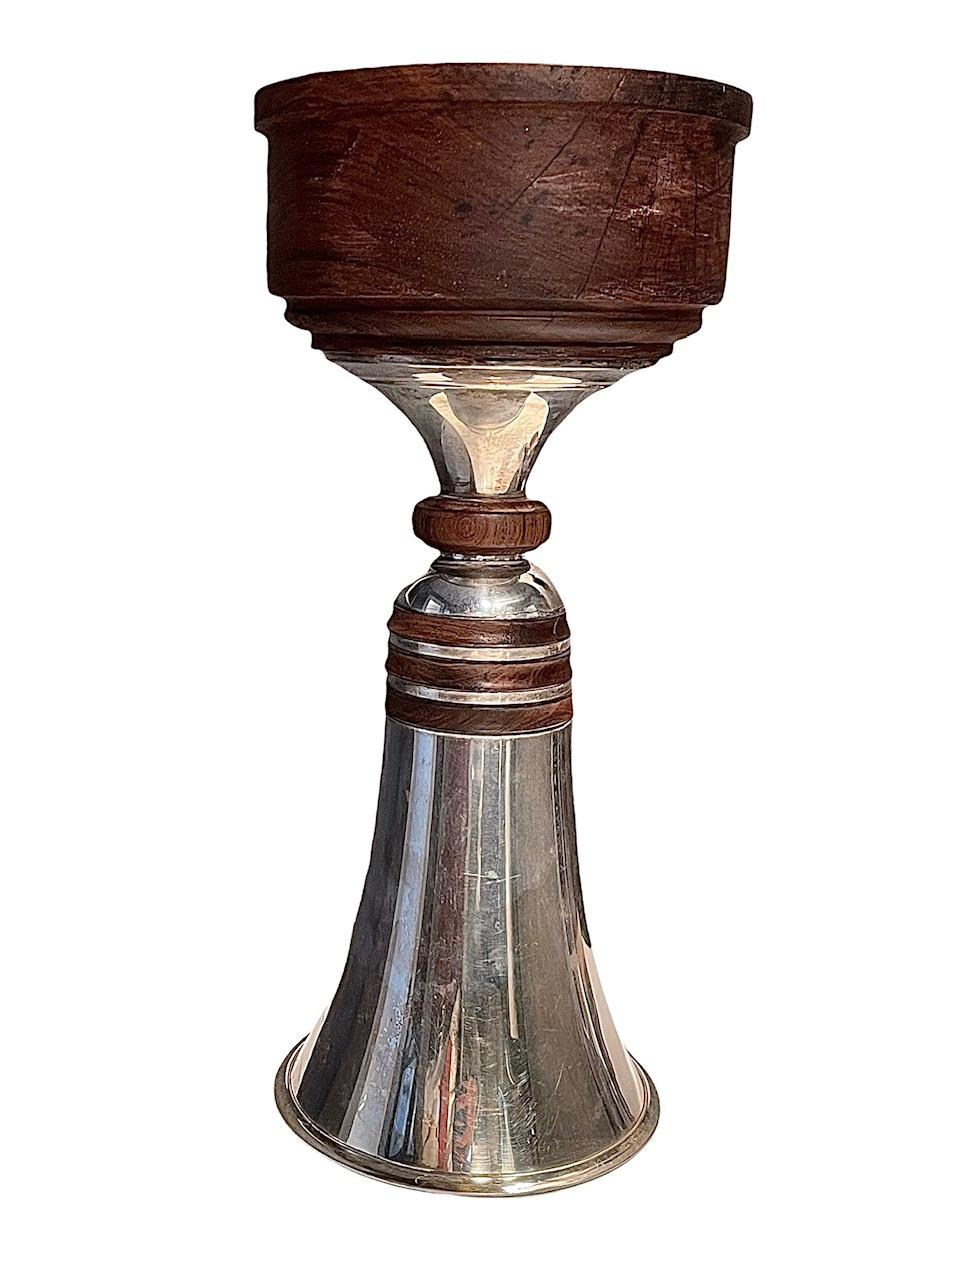 20th Century Belgian Sterling Silver Vase on Wood Stand, by Brussels Wolfers, circa 1950 For Sale